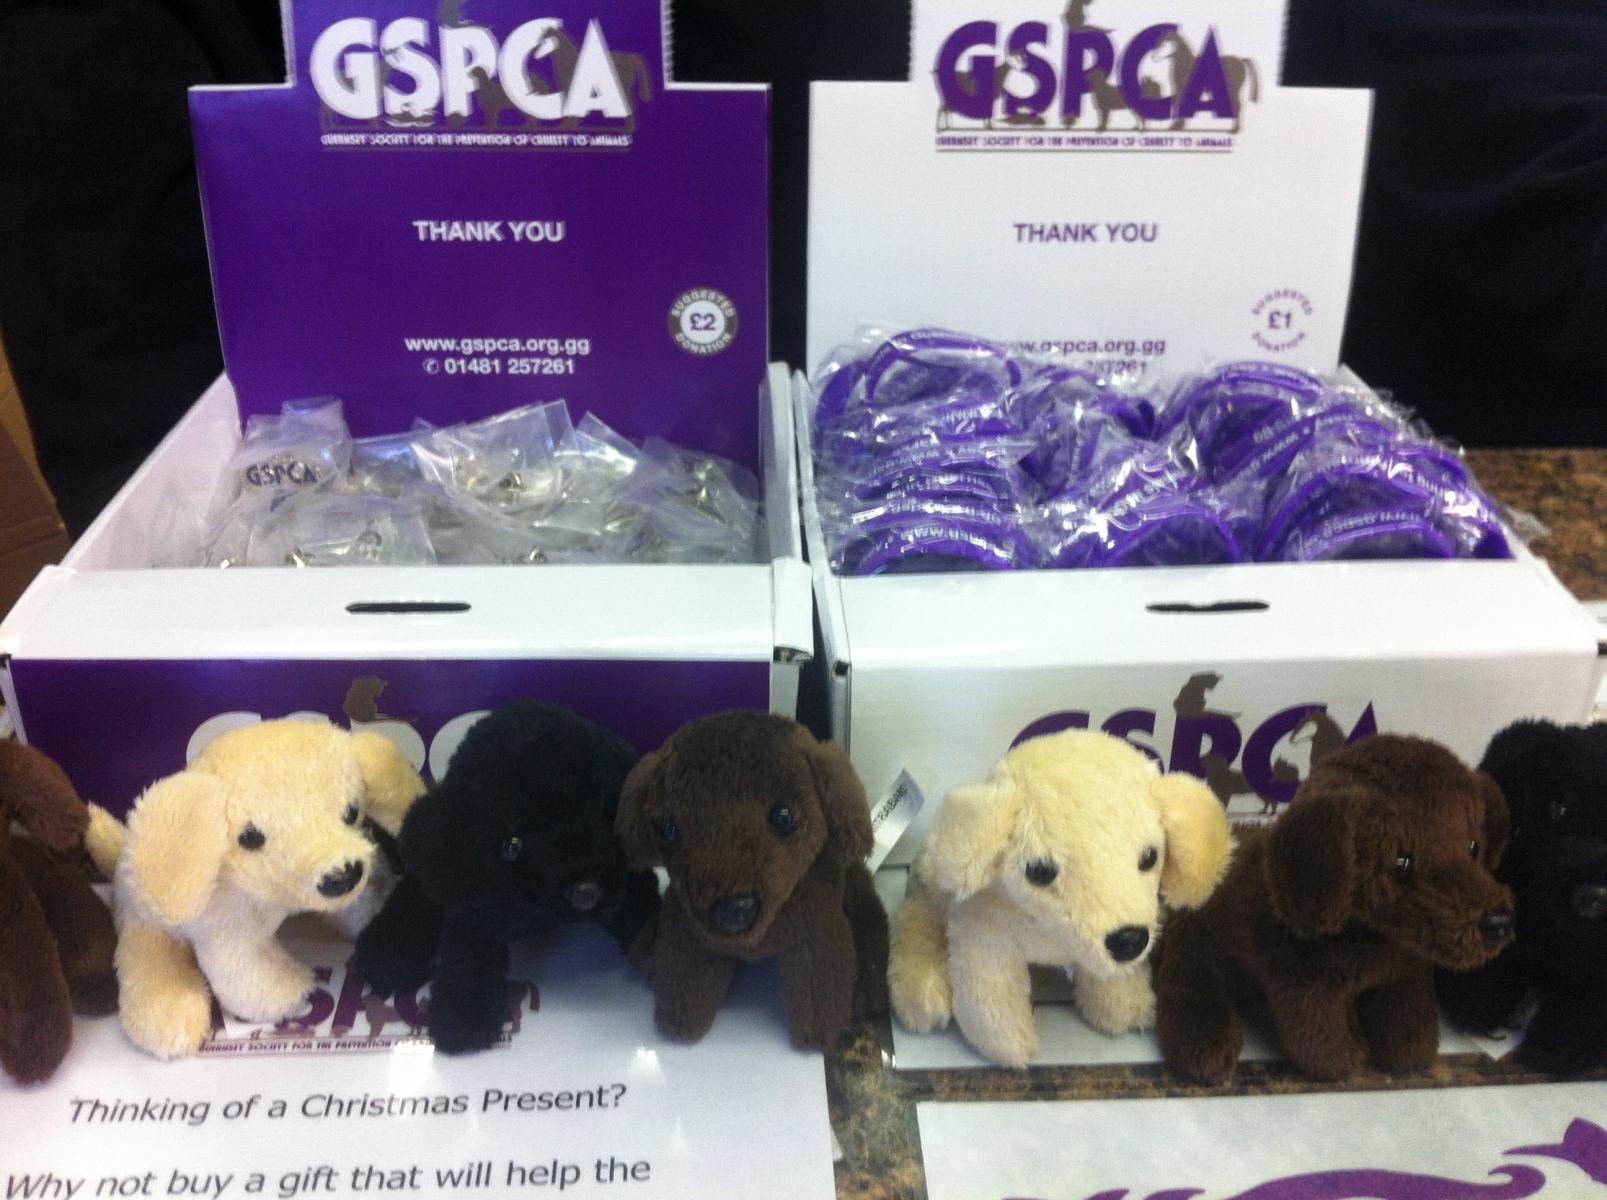 Help raise funds for the GSPCA 140th year